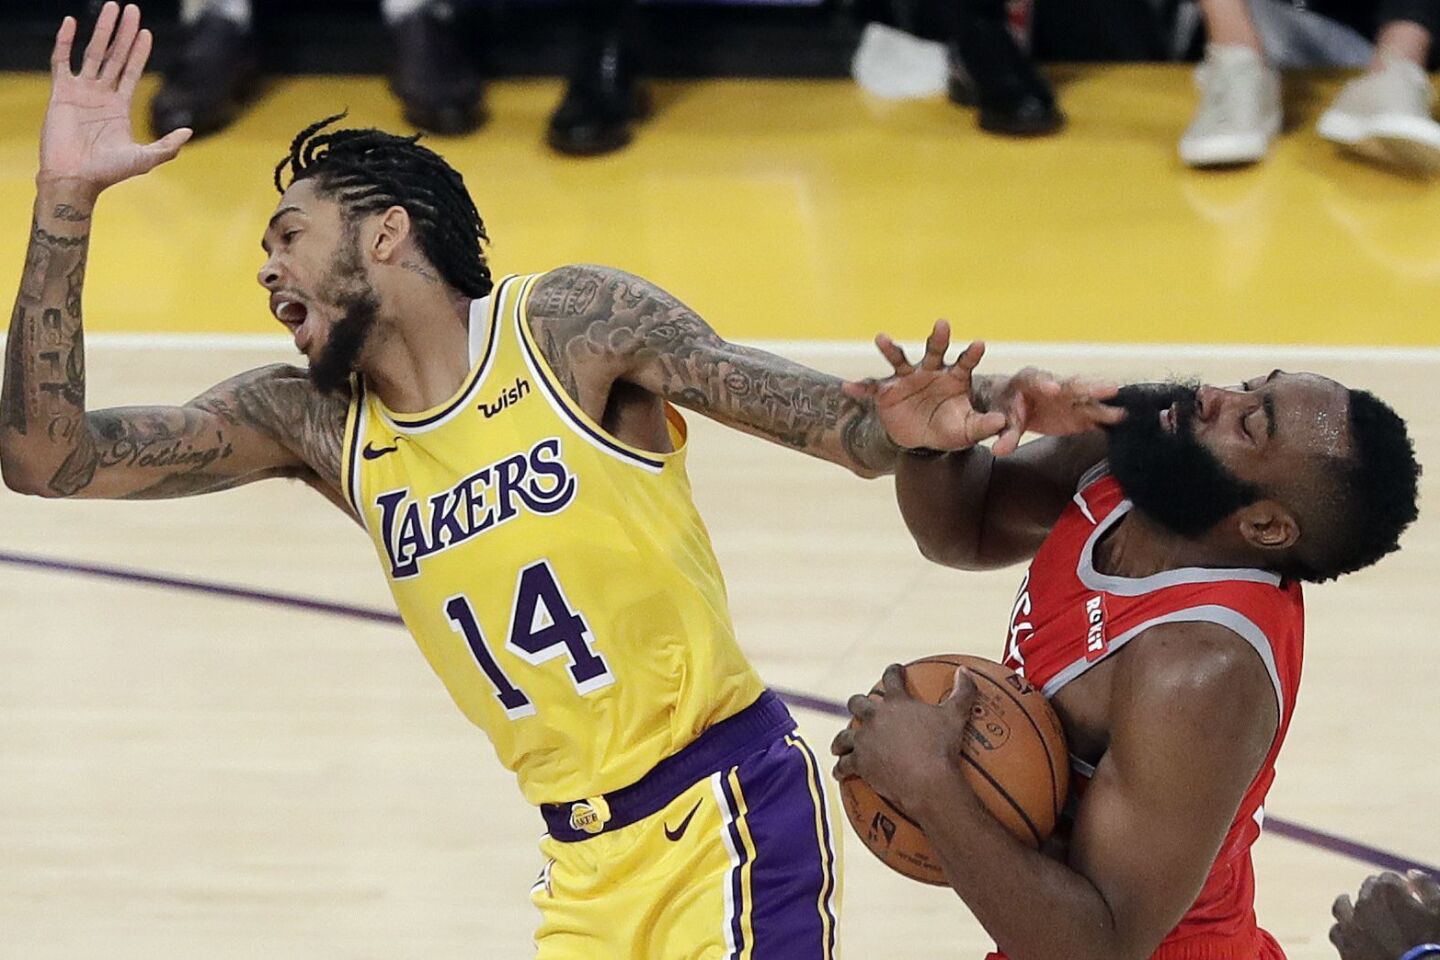 Rockets guard James Harden collides with Lakers forward Brandon Ingram, who was called for a foul on the play with 4 minutes left in the fourth quarter. That led to an exchange of words before Ingram shoved Harden, igniting a brawl.